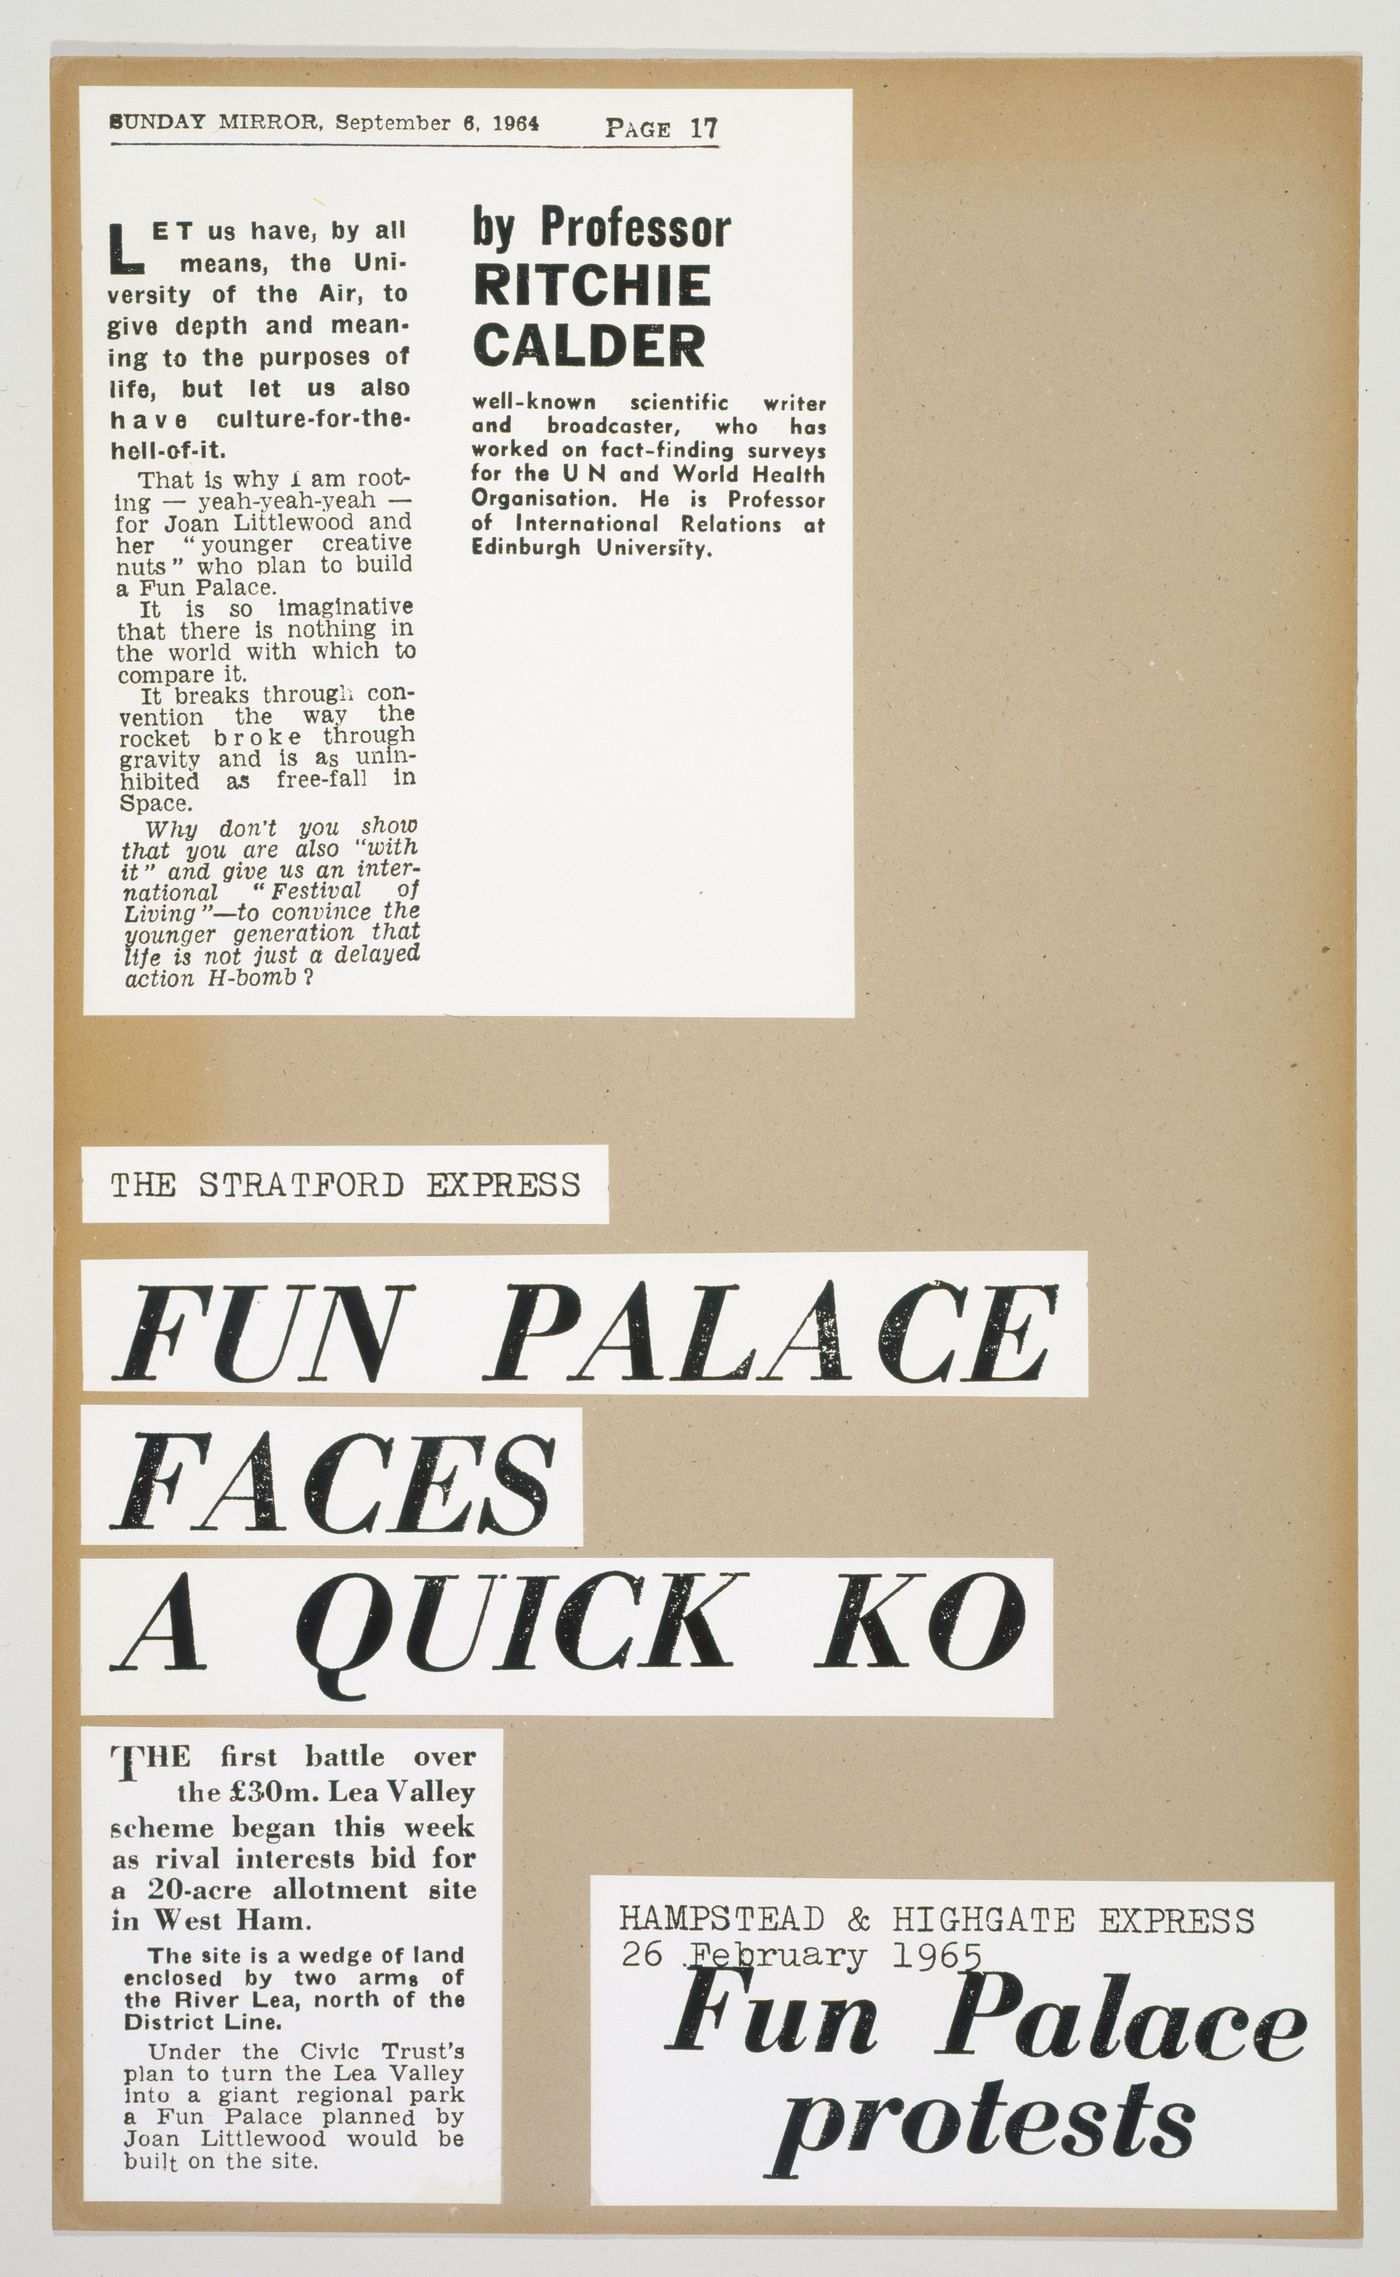 Newspaper articles about Fun Palace